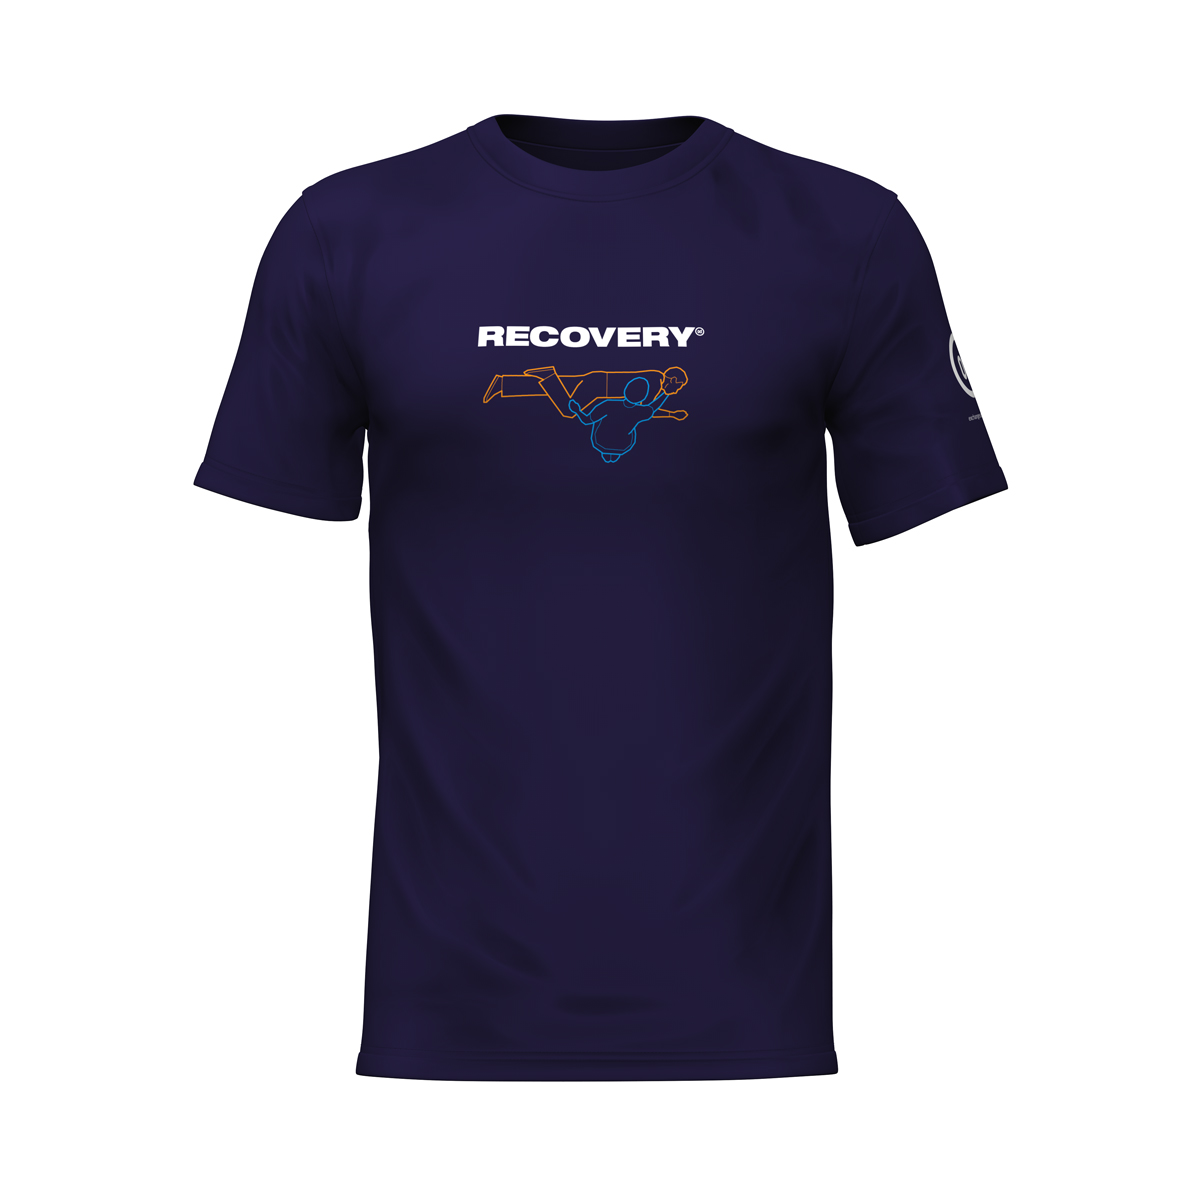 Recovery T-shirt pack of 12 (mixed sizes)